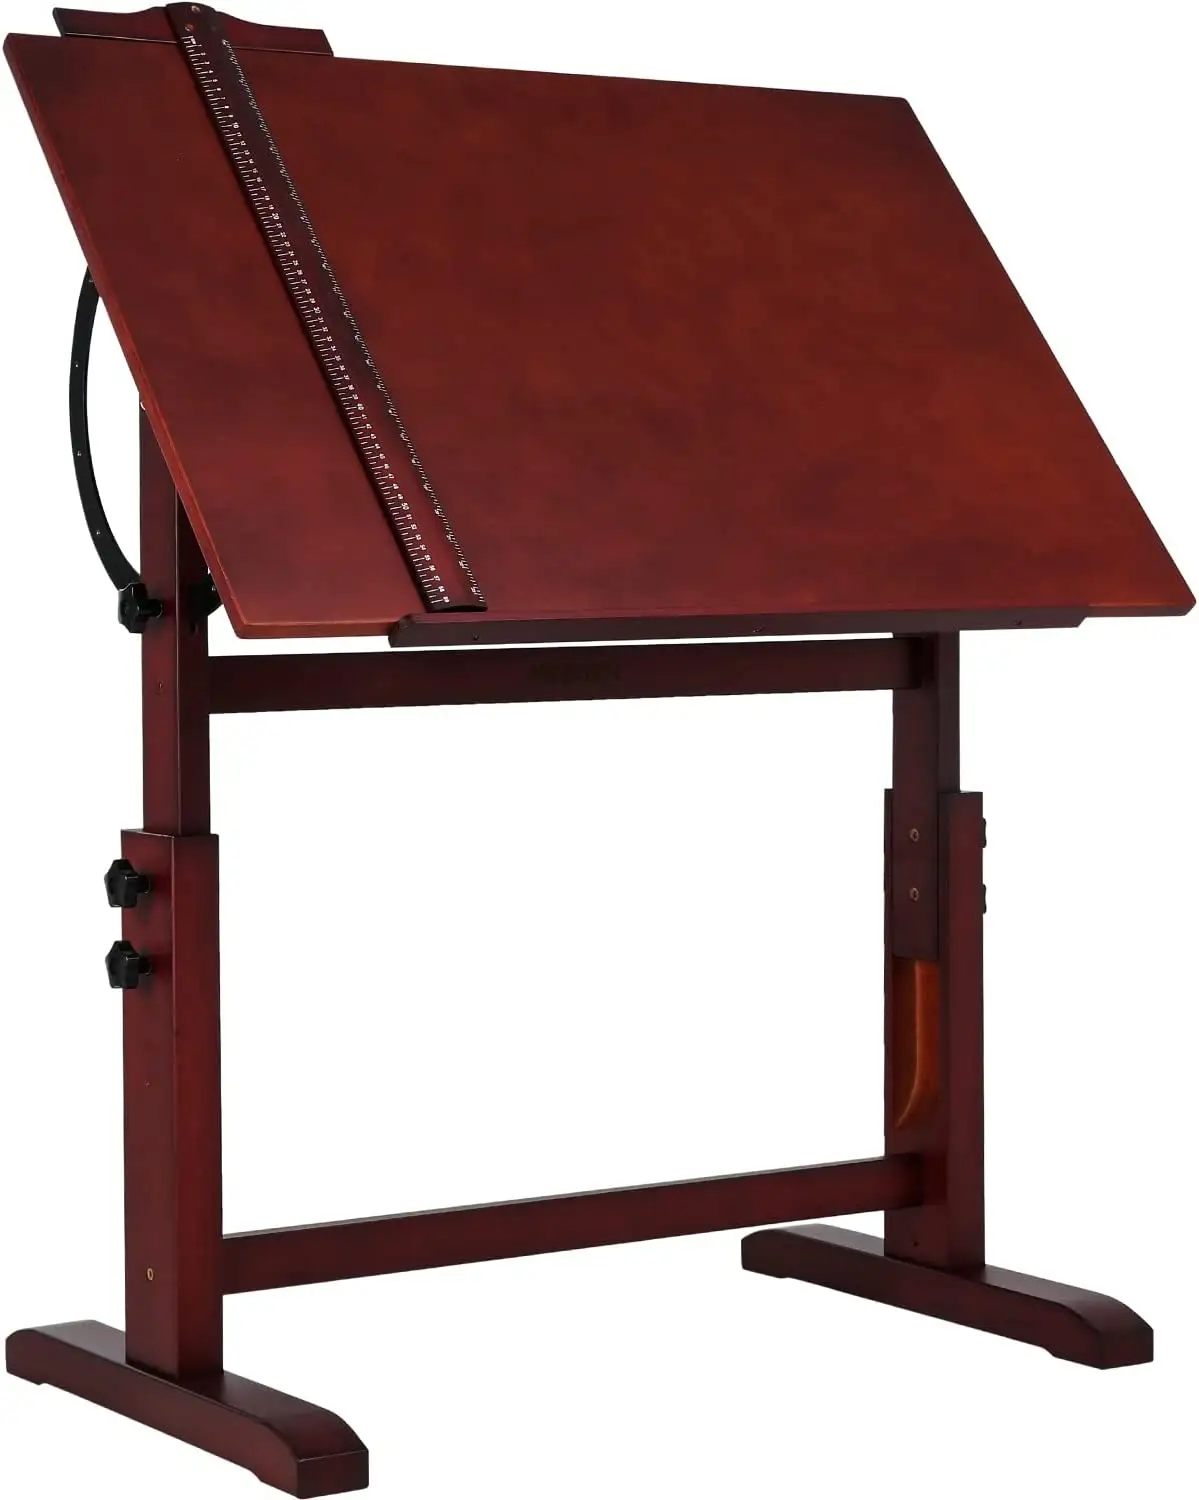 MEEDEN Vintage Wood Drafting Table & Stool Set Artist Drafting Chair and Craft Table with Adjustable Height Tiltable Tabletop